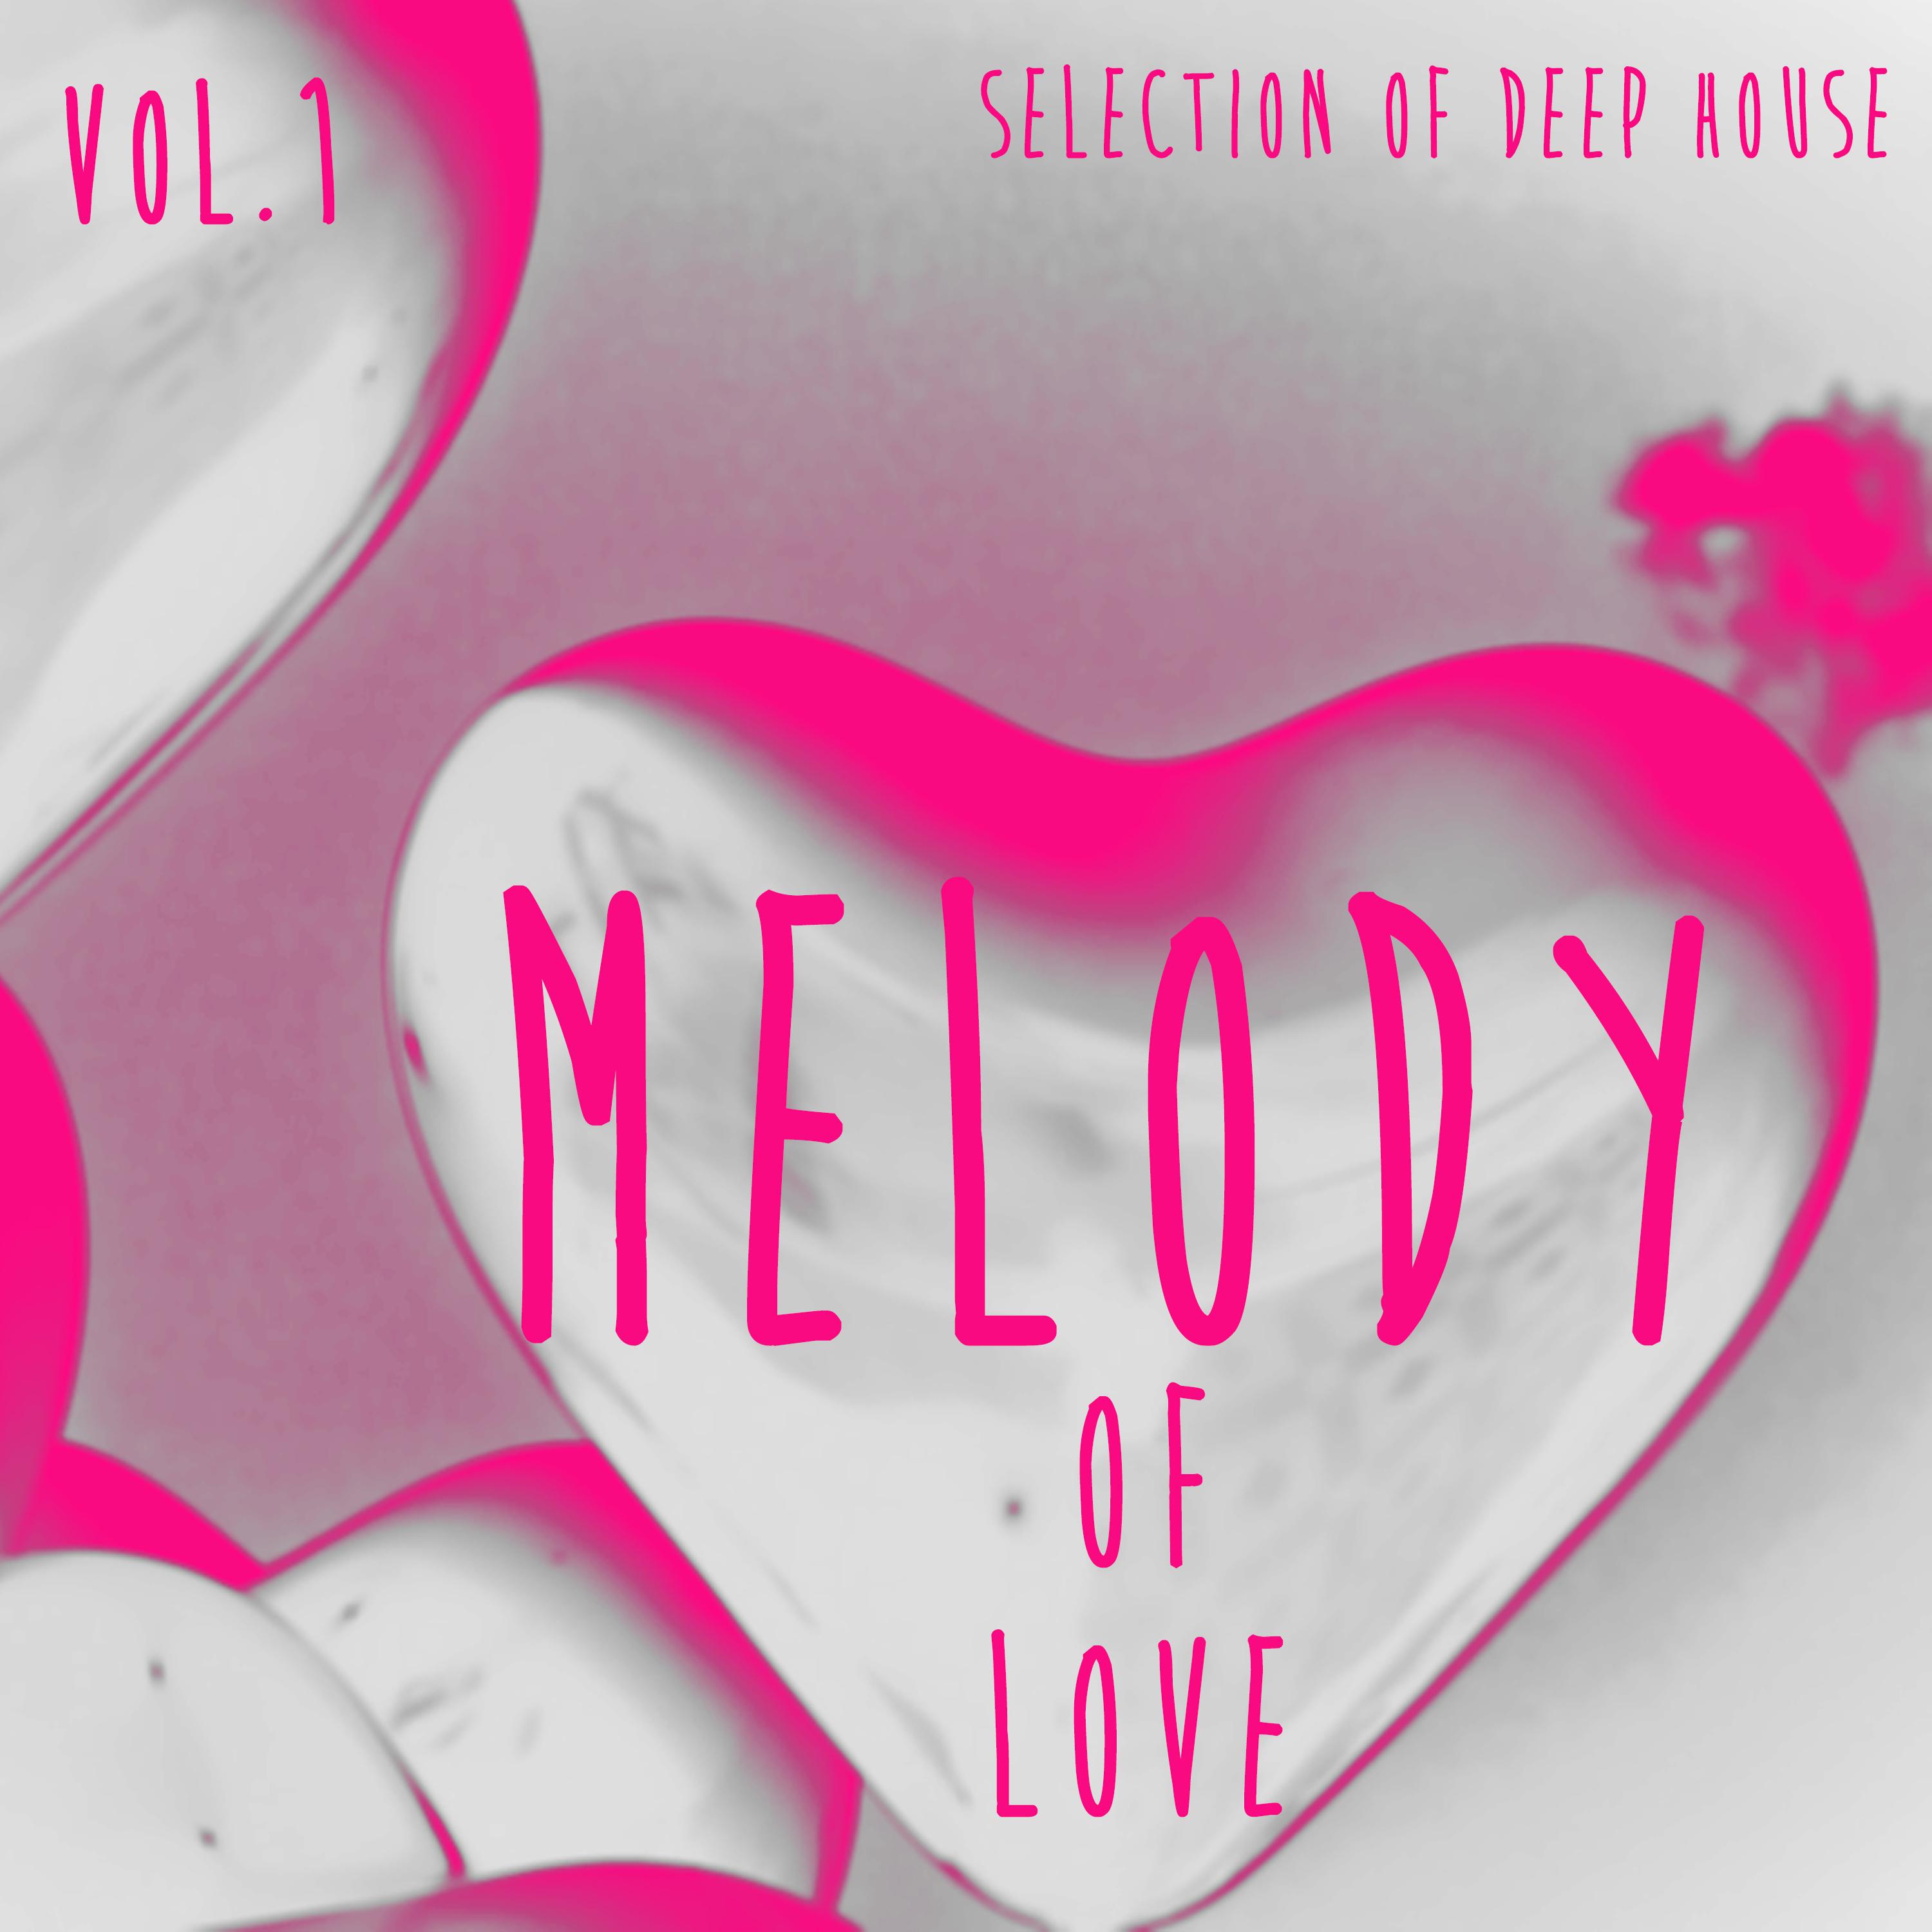 Melody of Love, Vol. 1 - Selection of Deep House